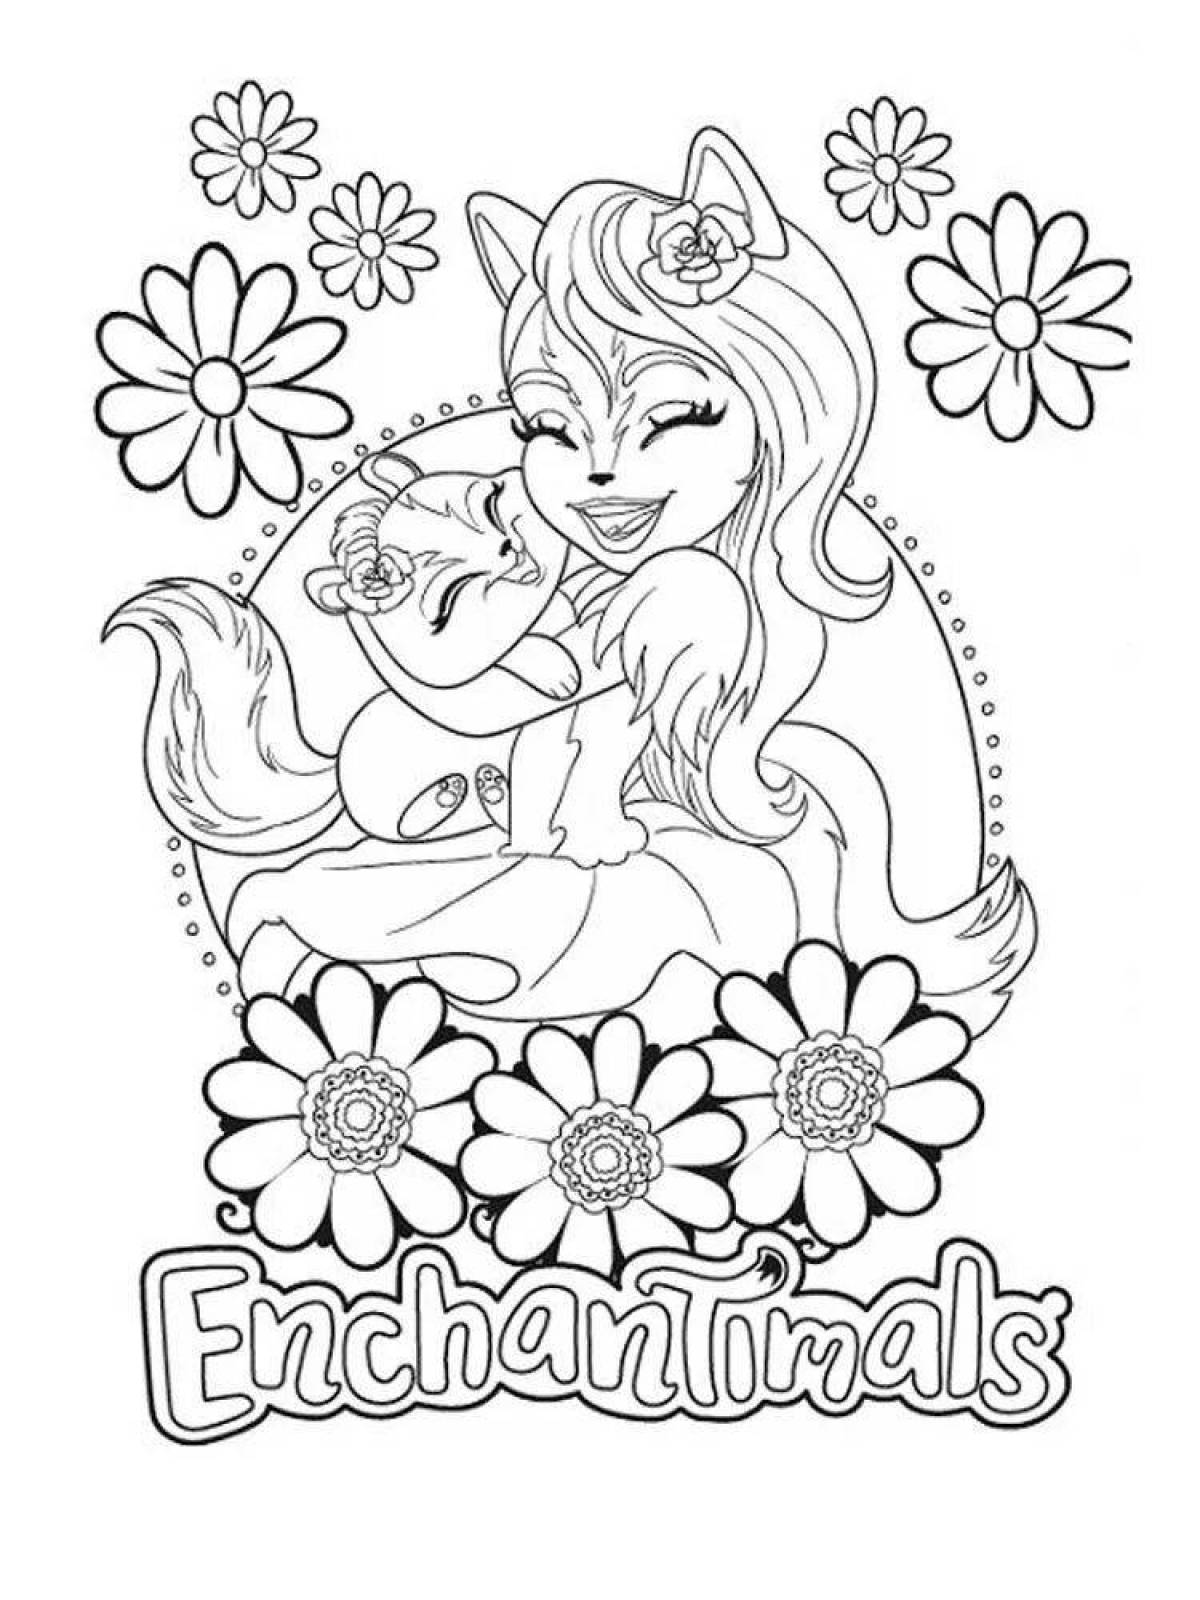 Serene incantimuls coloring page